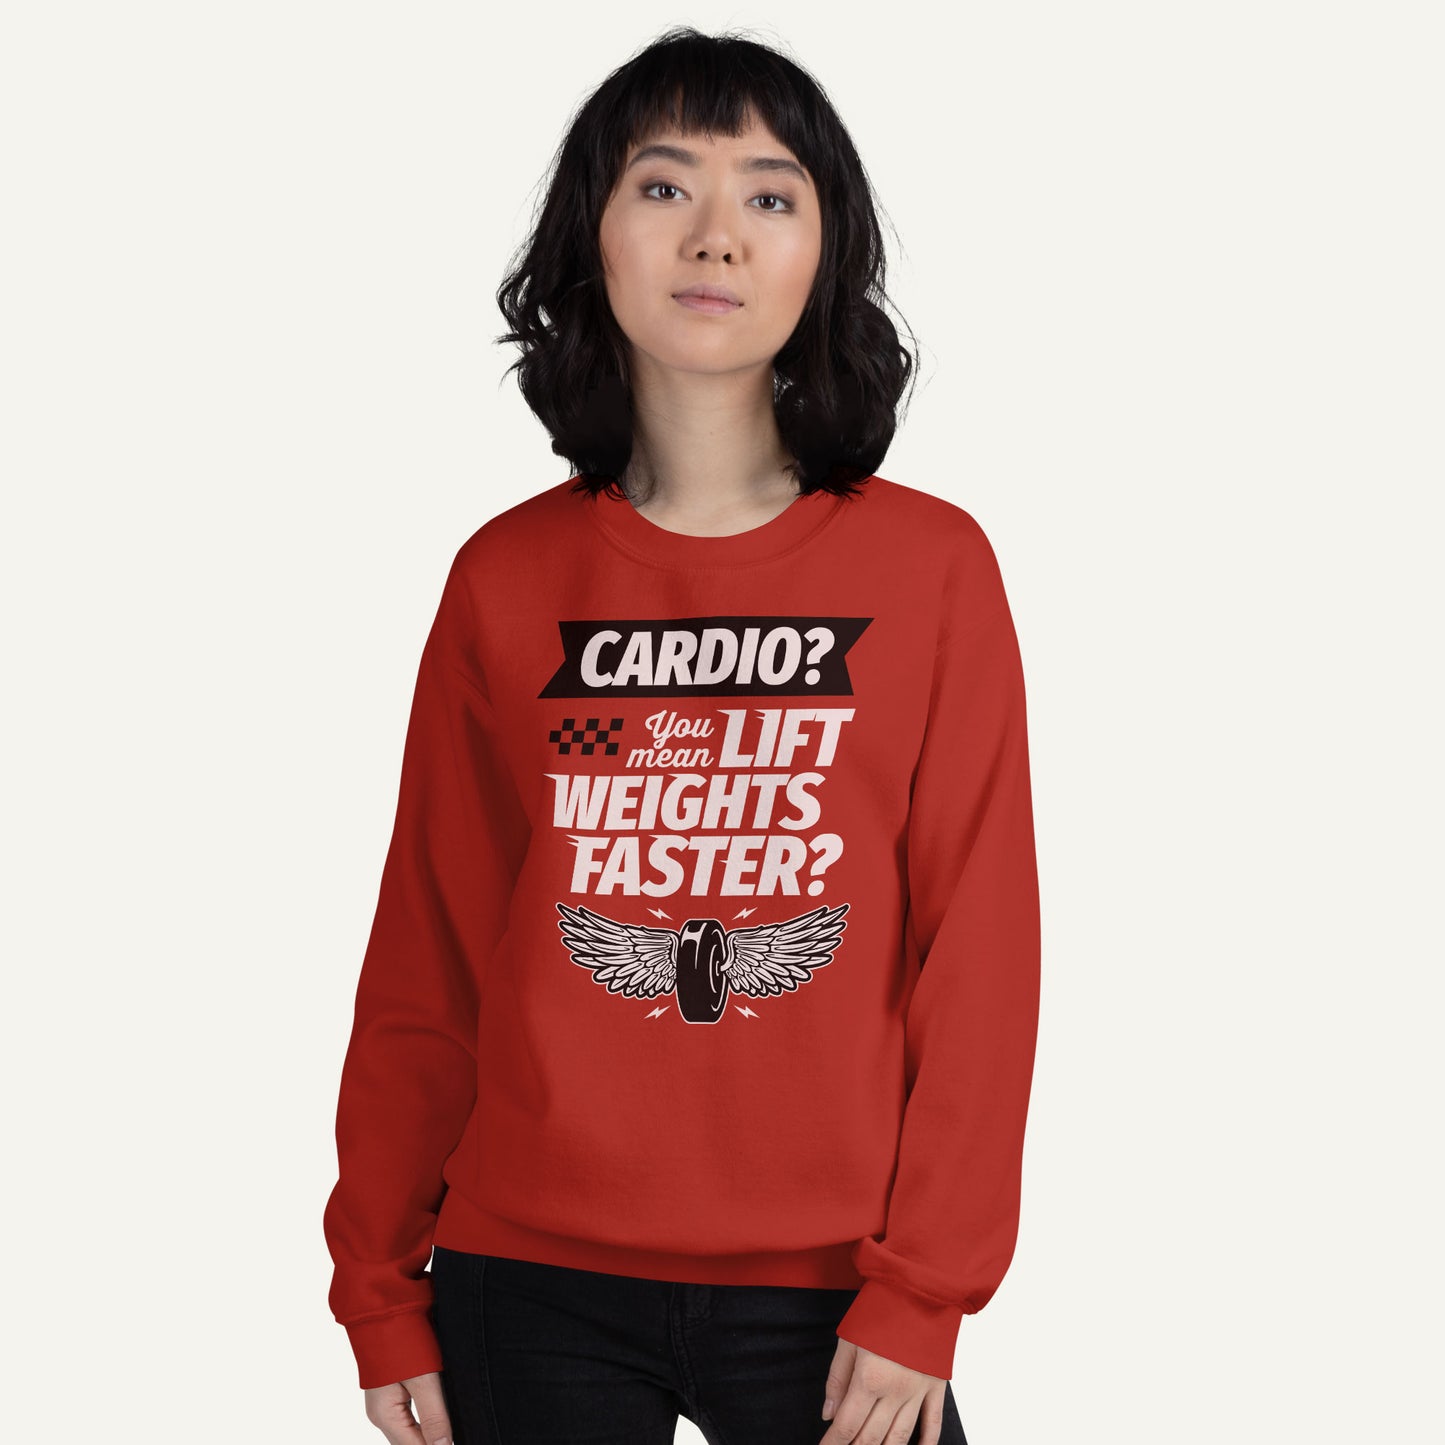 Cardio You Mean Lift Weights Faster Sweatshirt